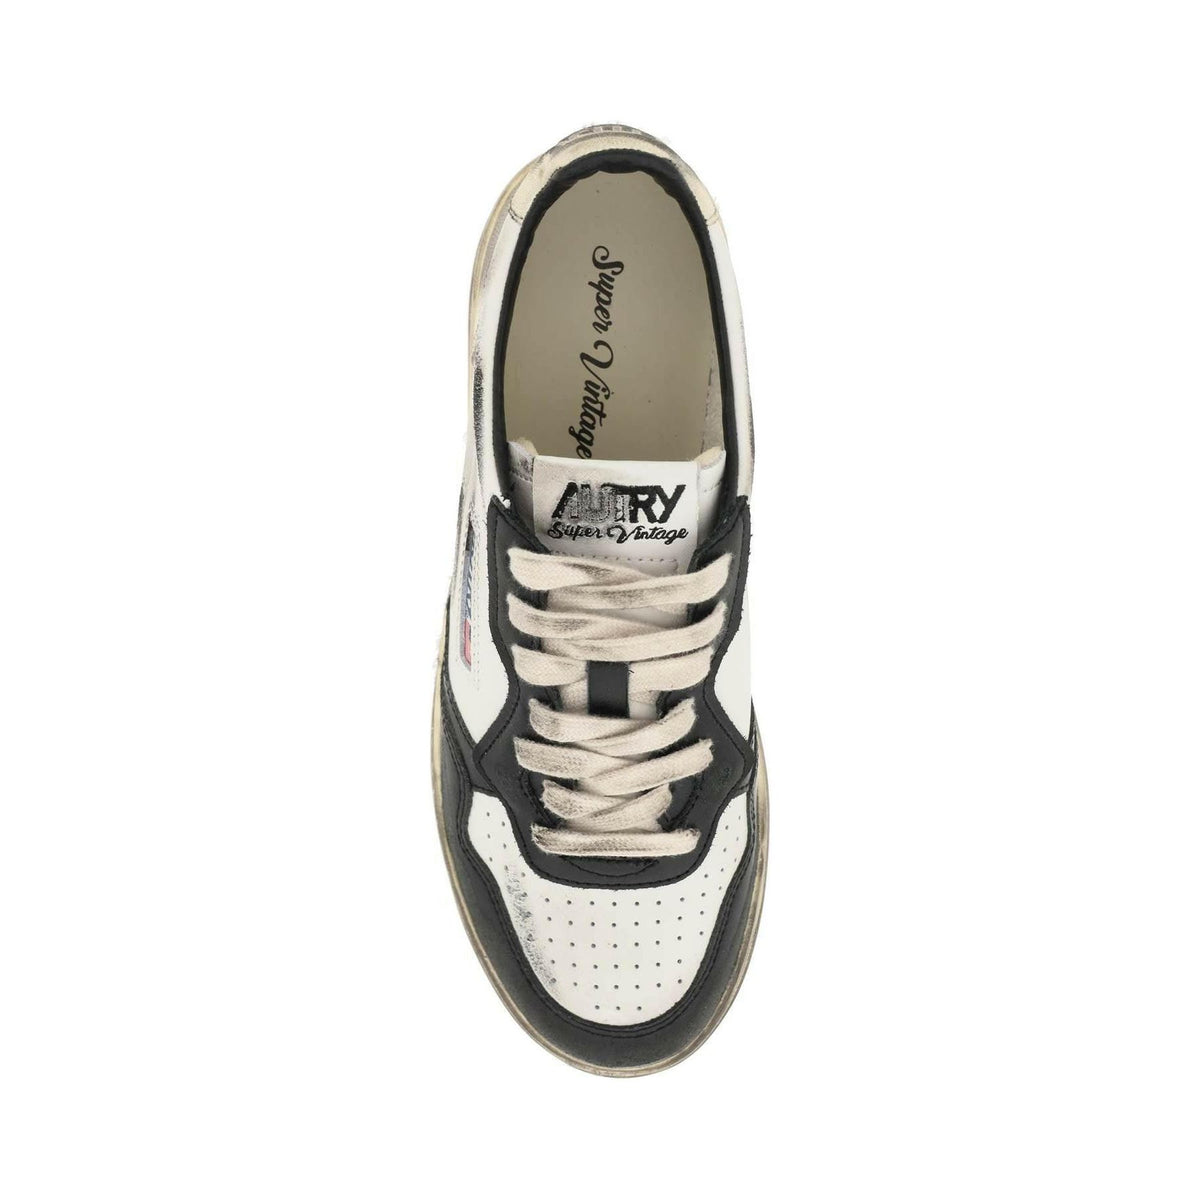 White and Black Medalist Low Super Vintage Sneakers AUTRY JOHN JULIA.